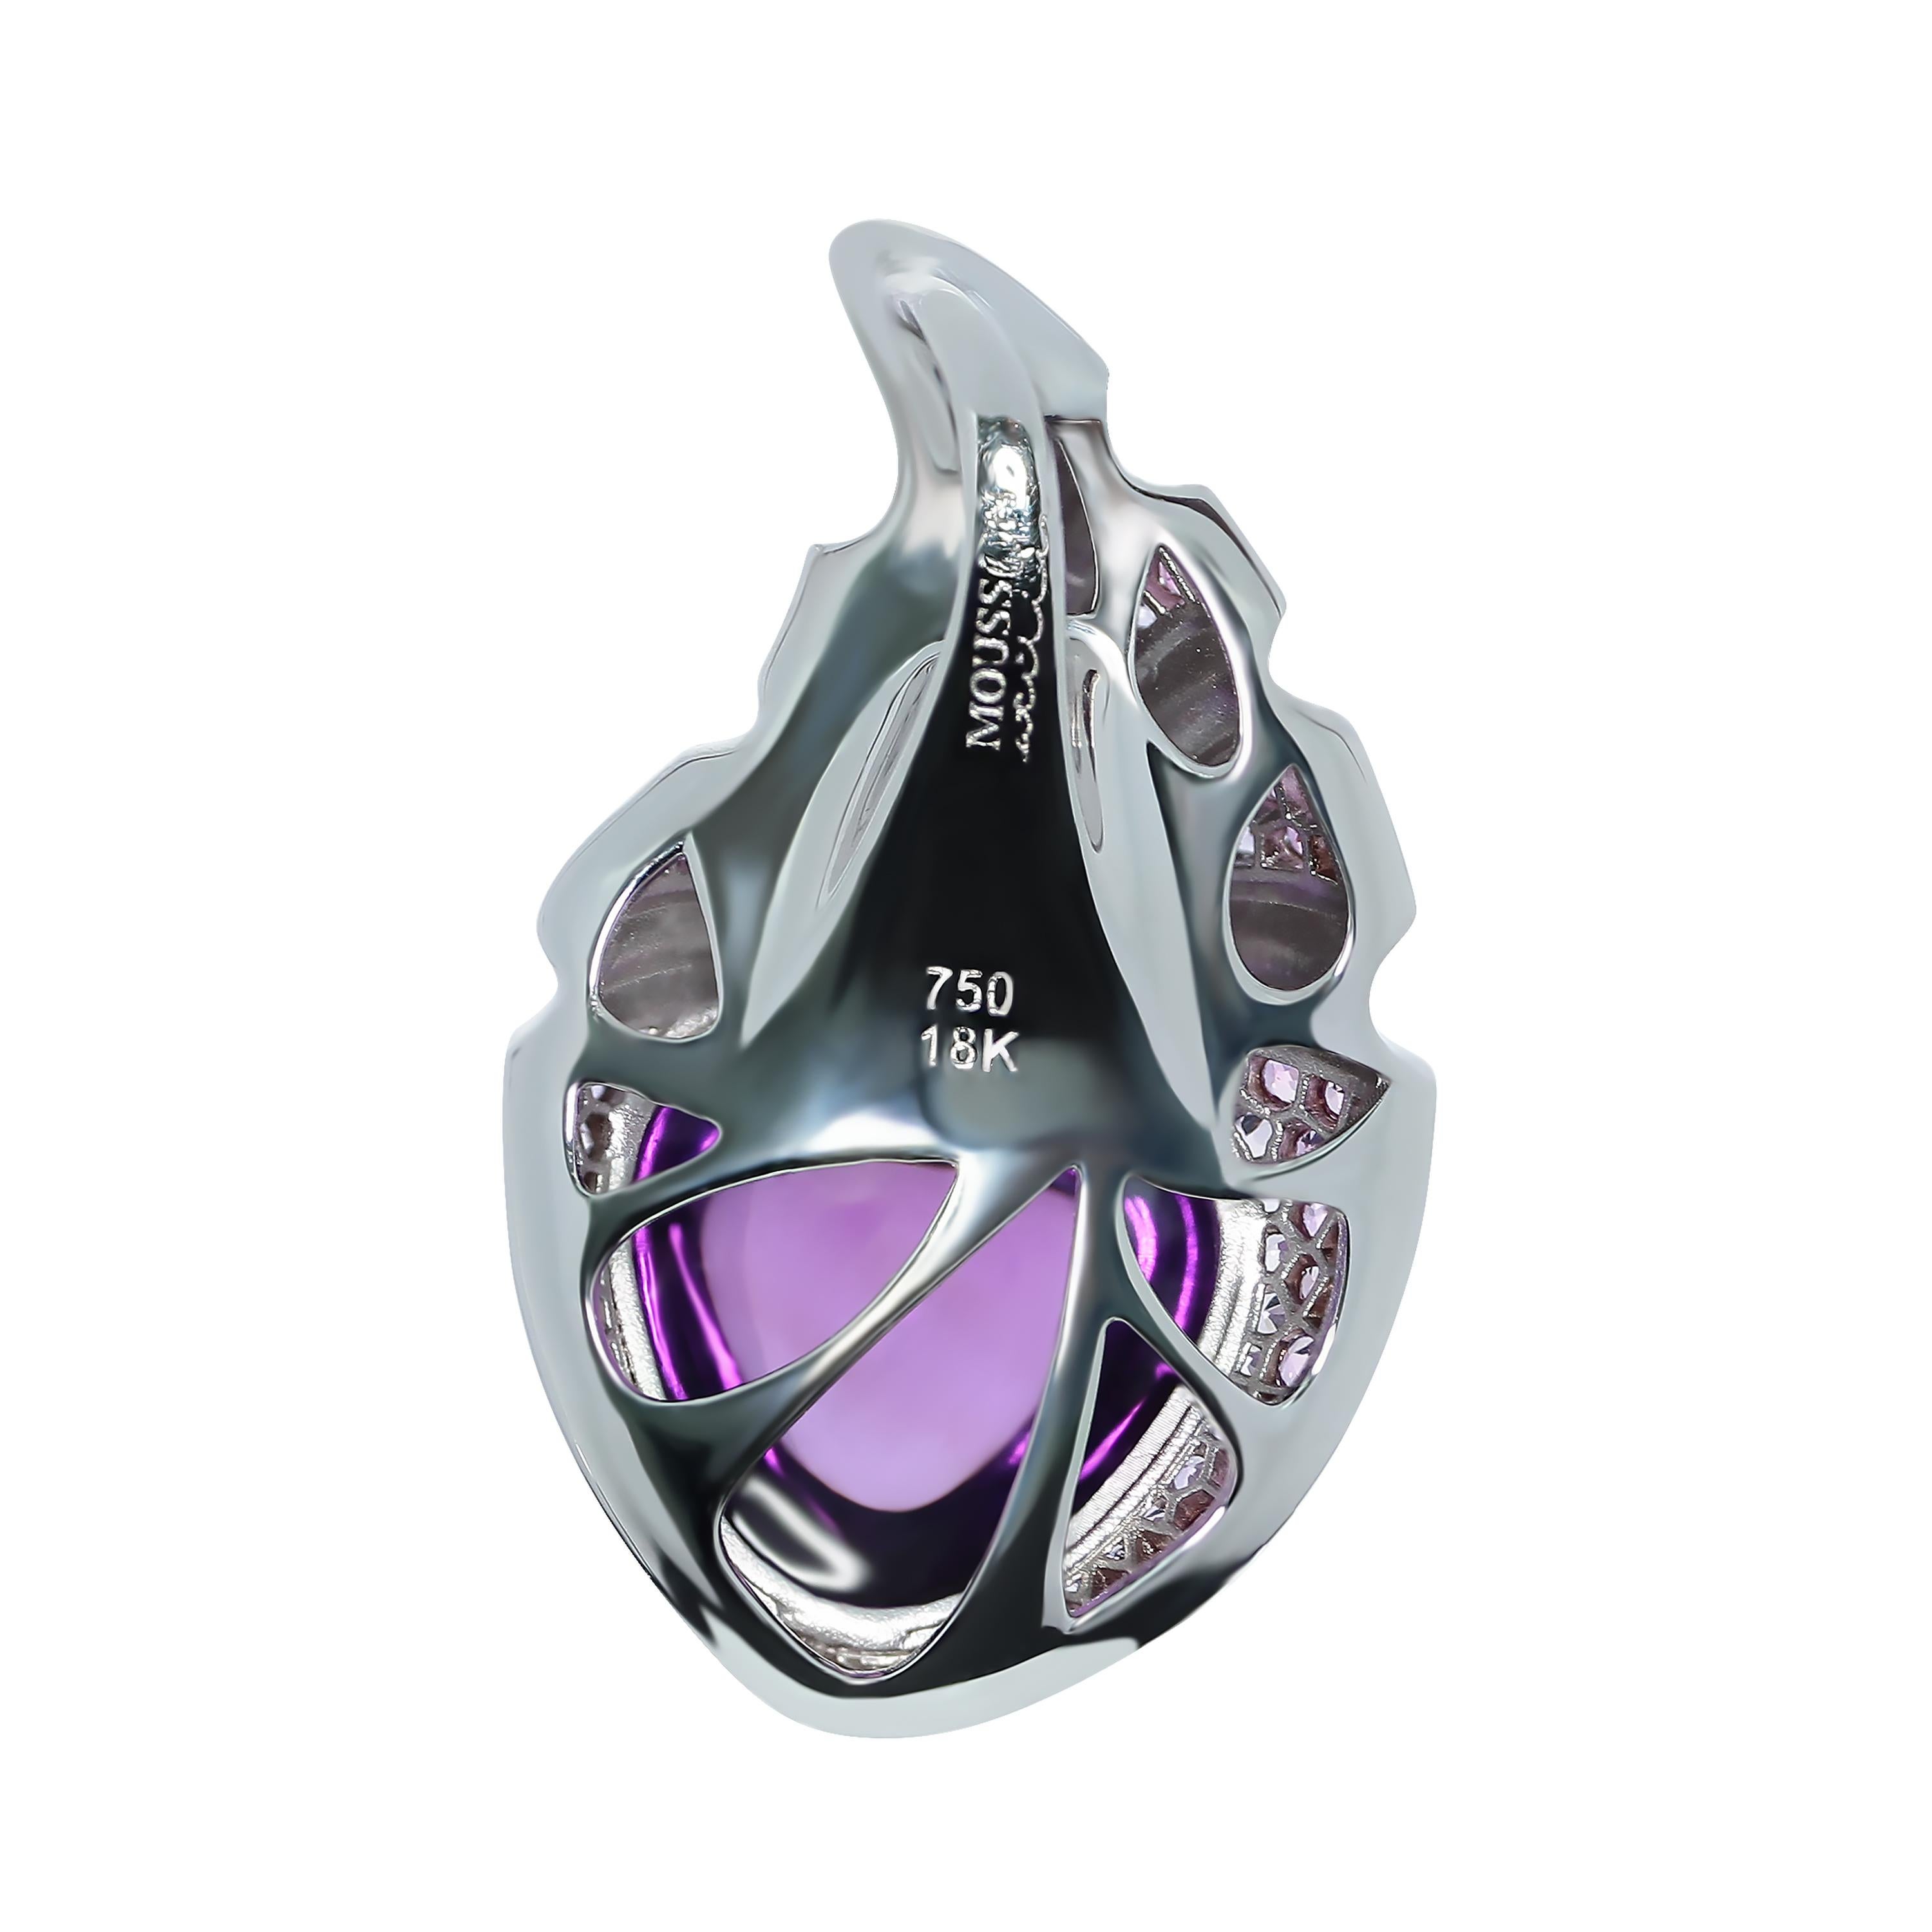 Amethyst 6.34 Carat Sapphire 18 Karat White Gold Pendant
As always, Mousson Atelier is playing with forms. Look at this incredibly stylish Pendant. It seems that 18 K White Gold literally flows like dough to the central stone, 6.34 Carat